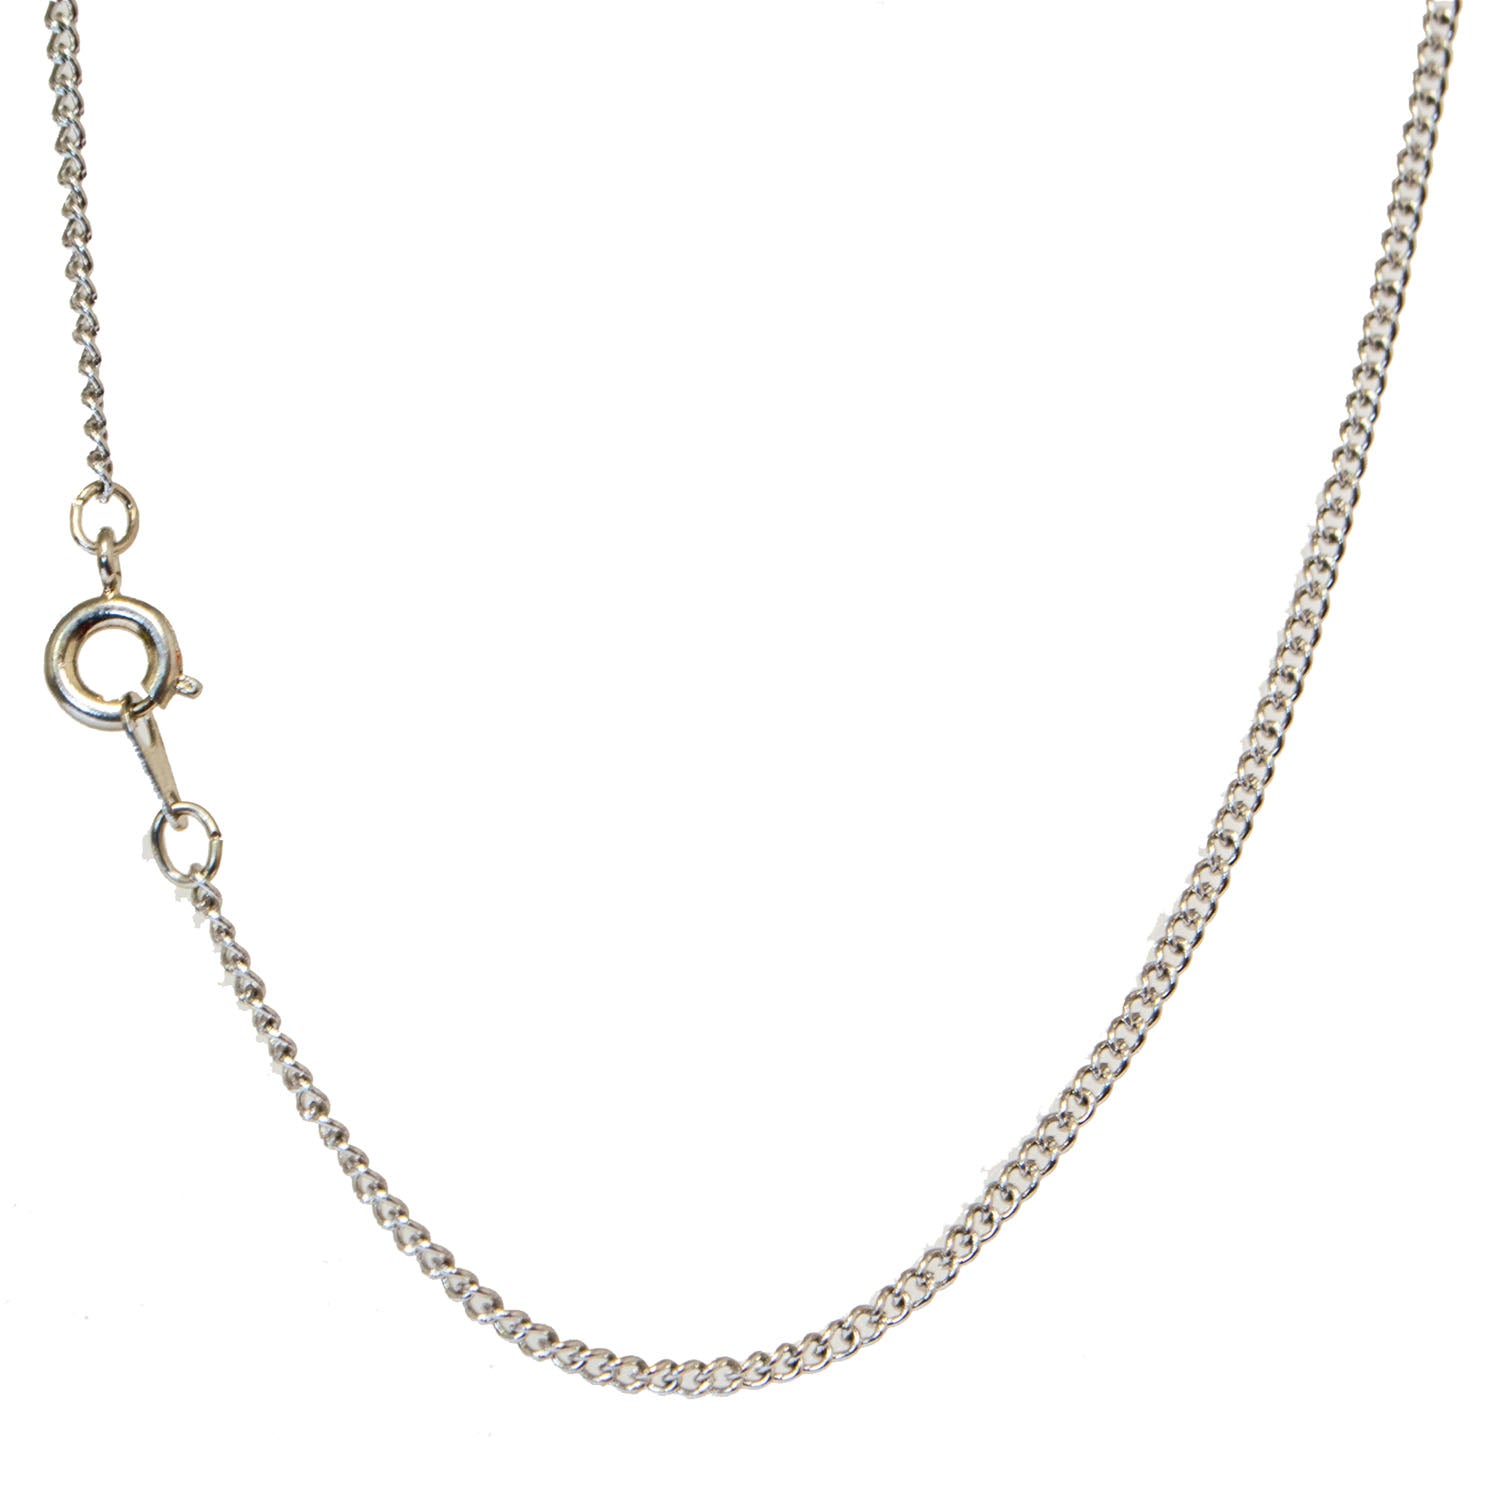 Surgical Steel Neck Chain - Photograph 1